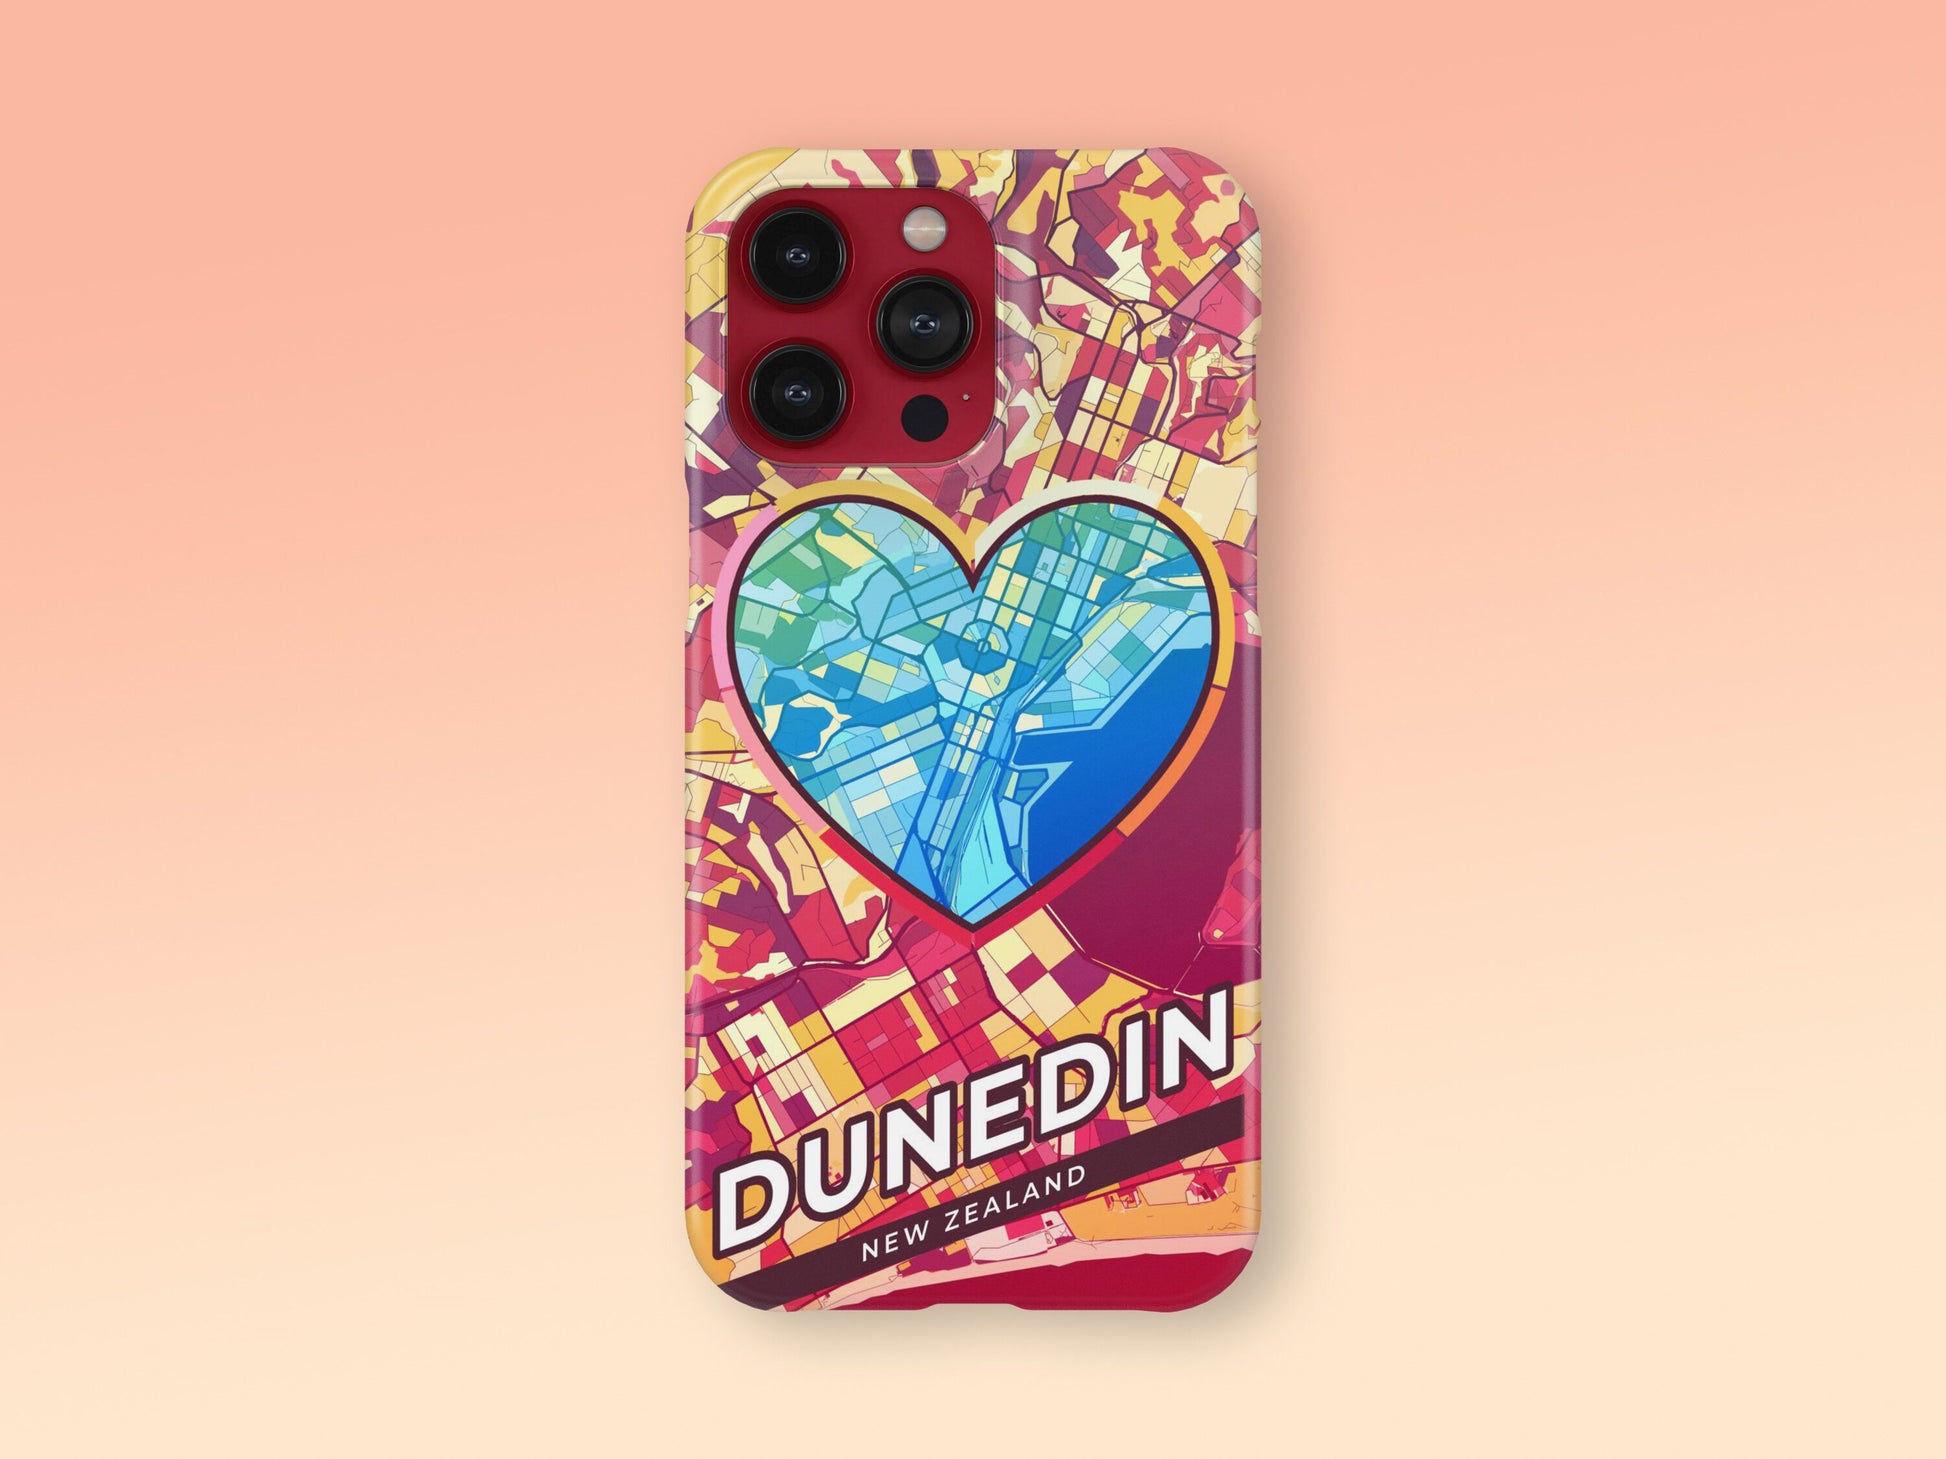 Dunedin New Zealand slim phone case with colorful icon. Birthday, wedding or housewarming gift. Couple match cases. 2